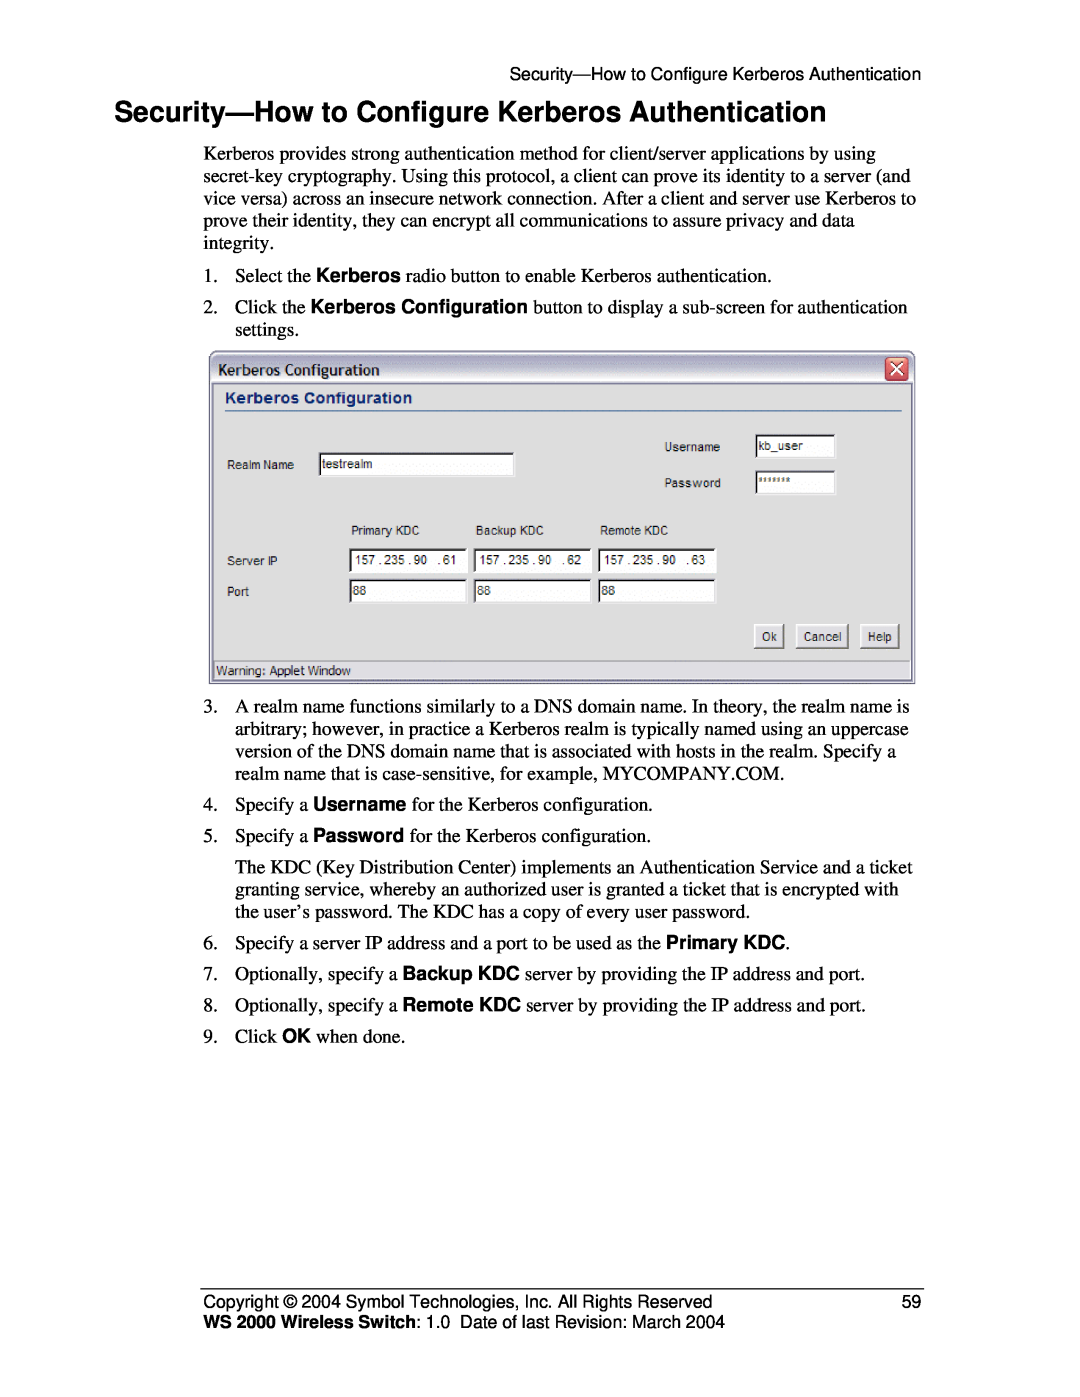 Symbol Technologies WS 2000 manual Security-How to Configure Kerberos Authentication 